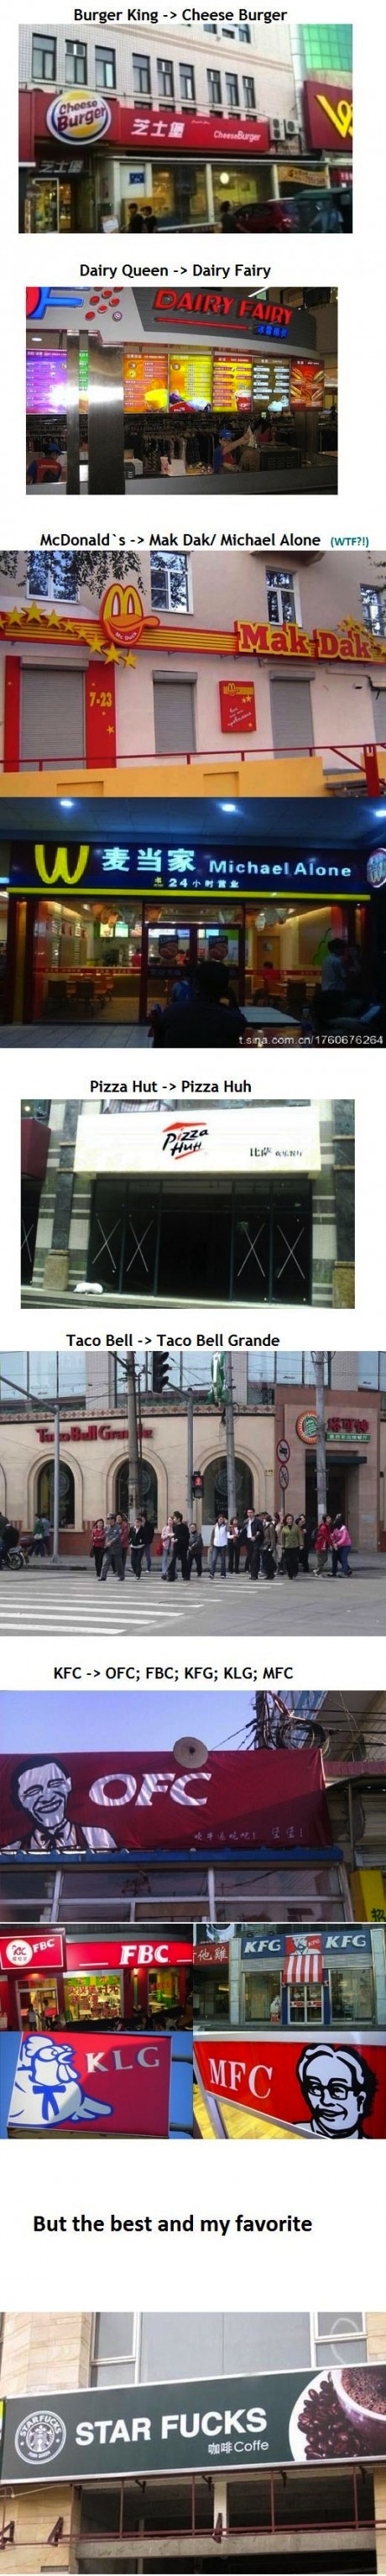 Hilarious renaming of fast food outlets.
